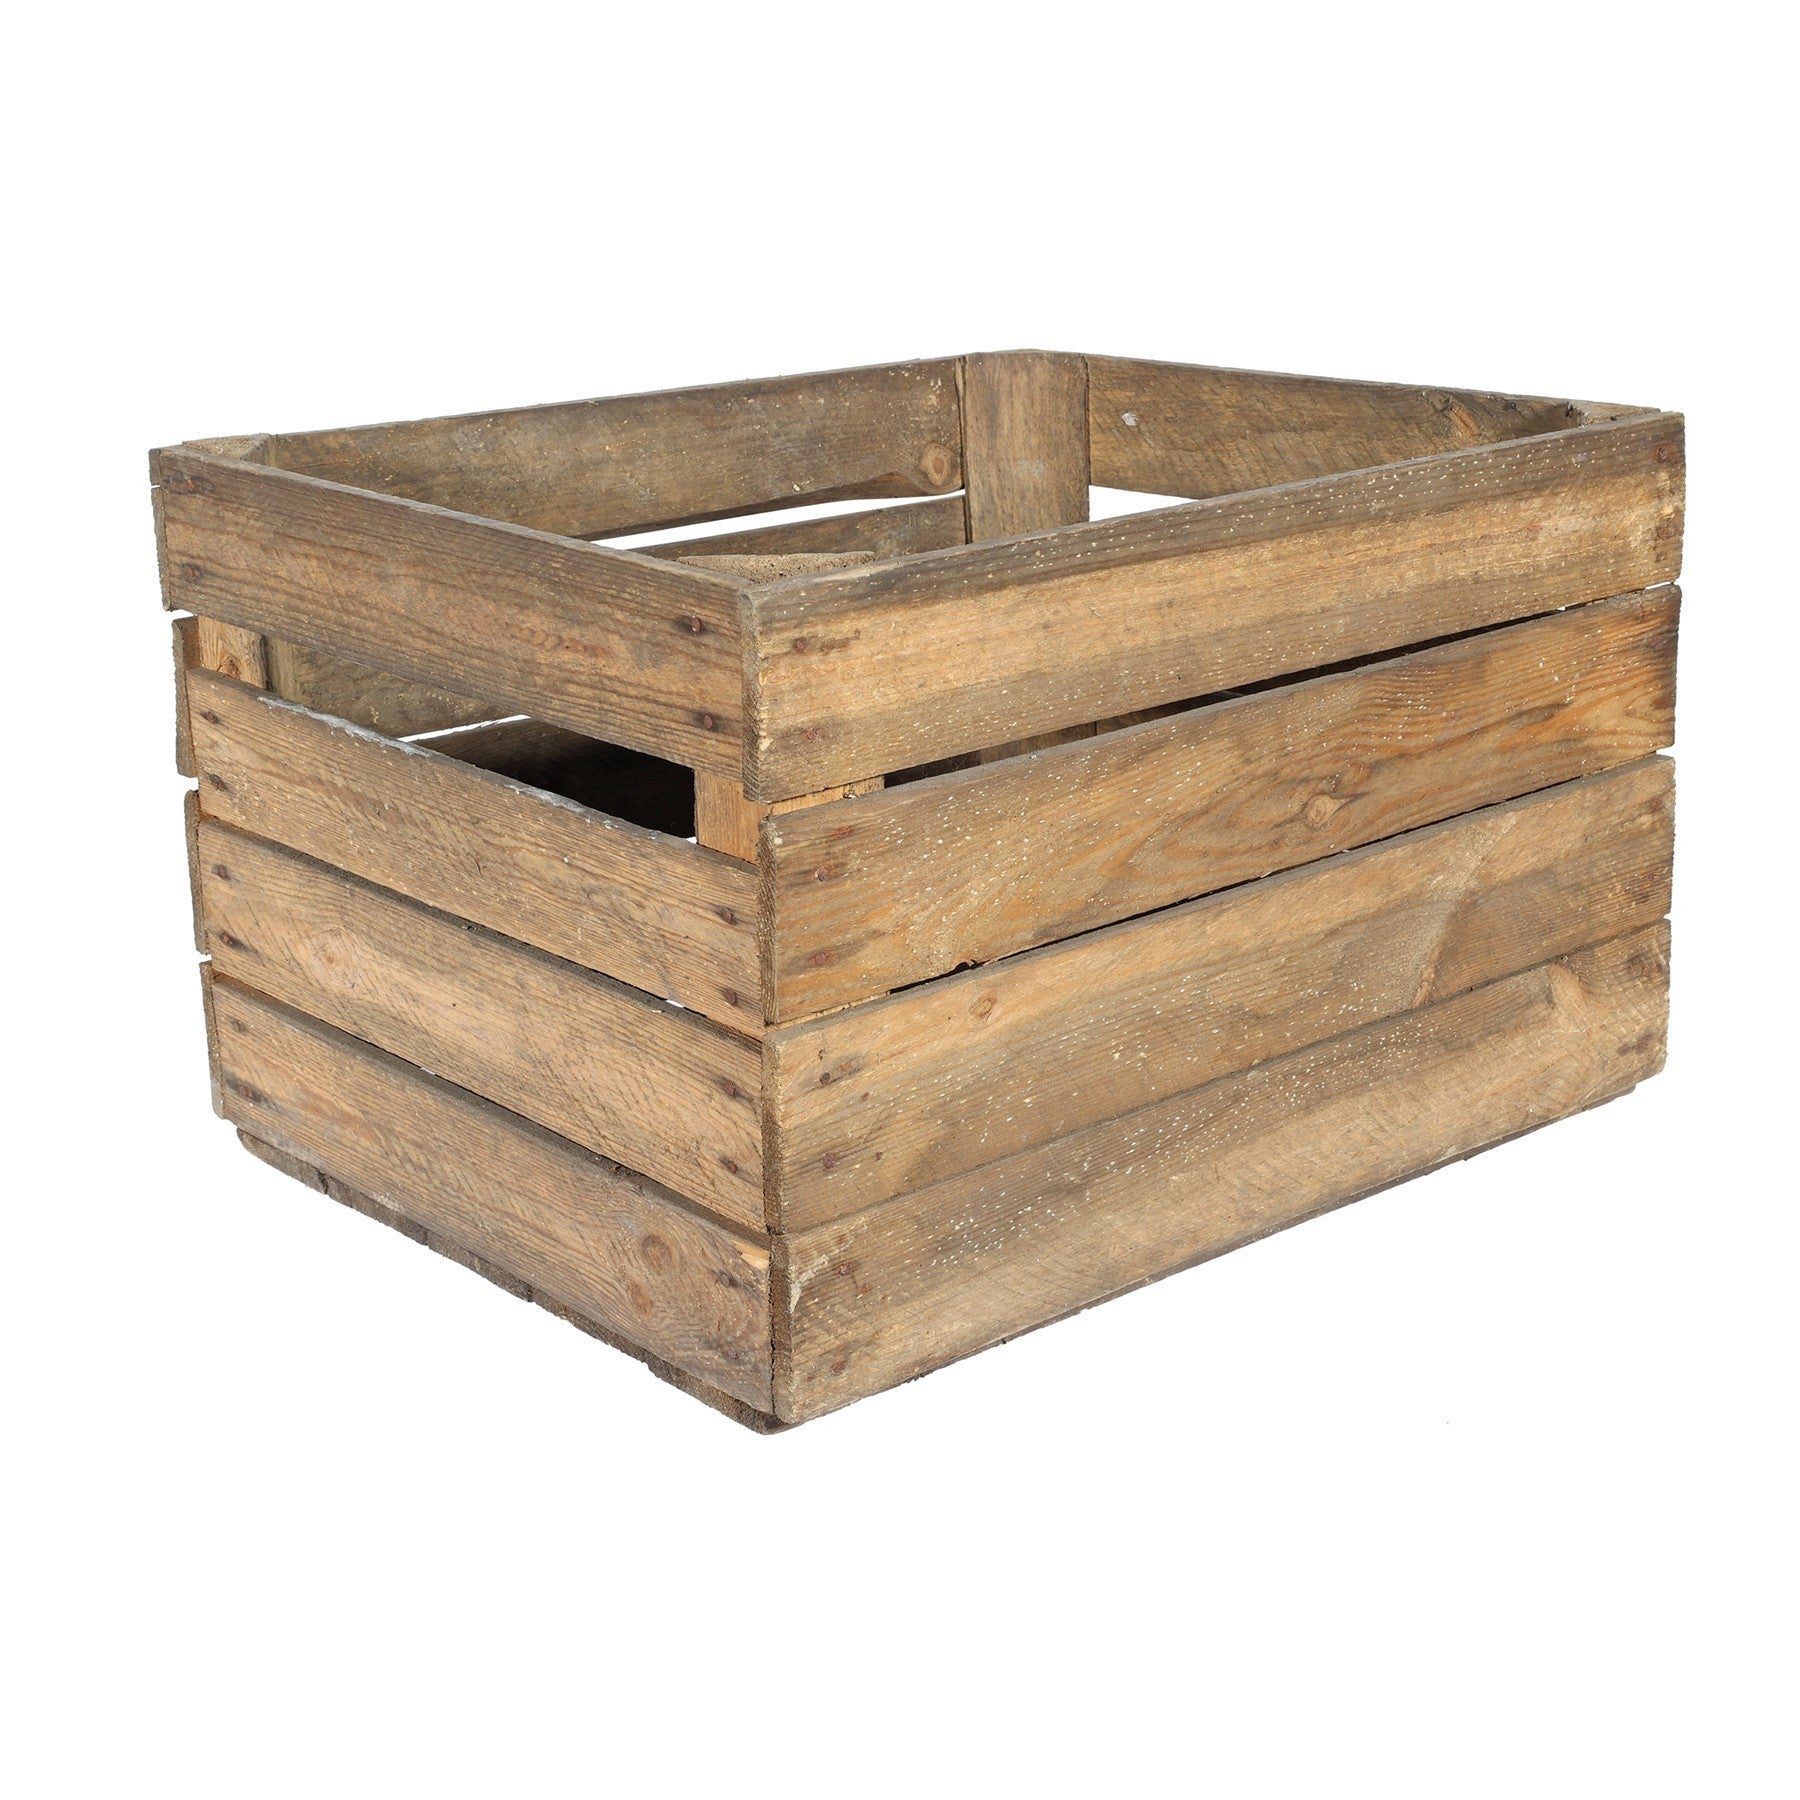 View Polish Wooden Crate information